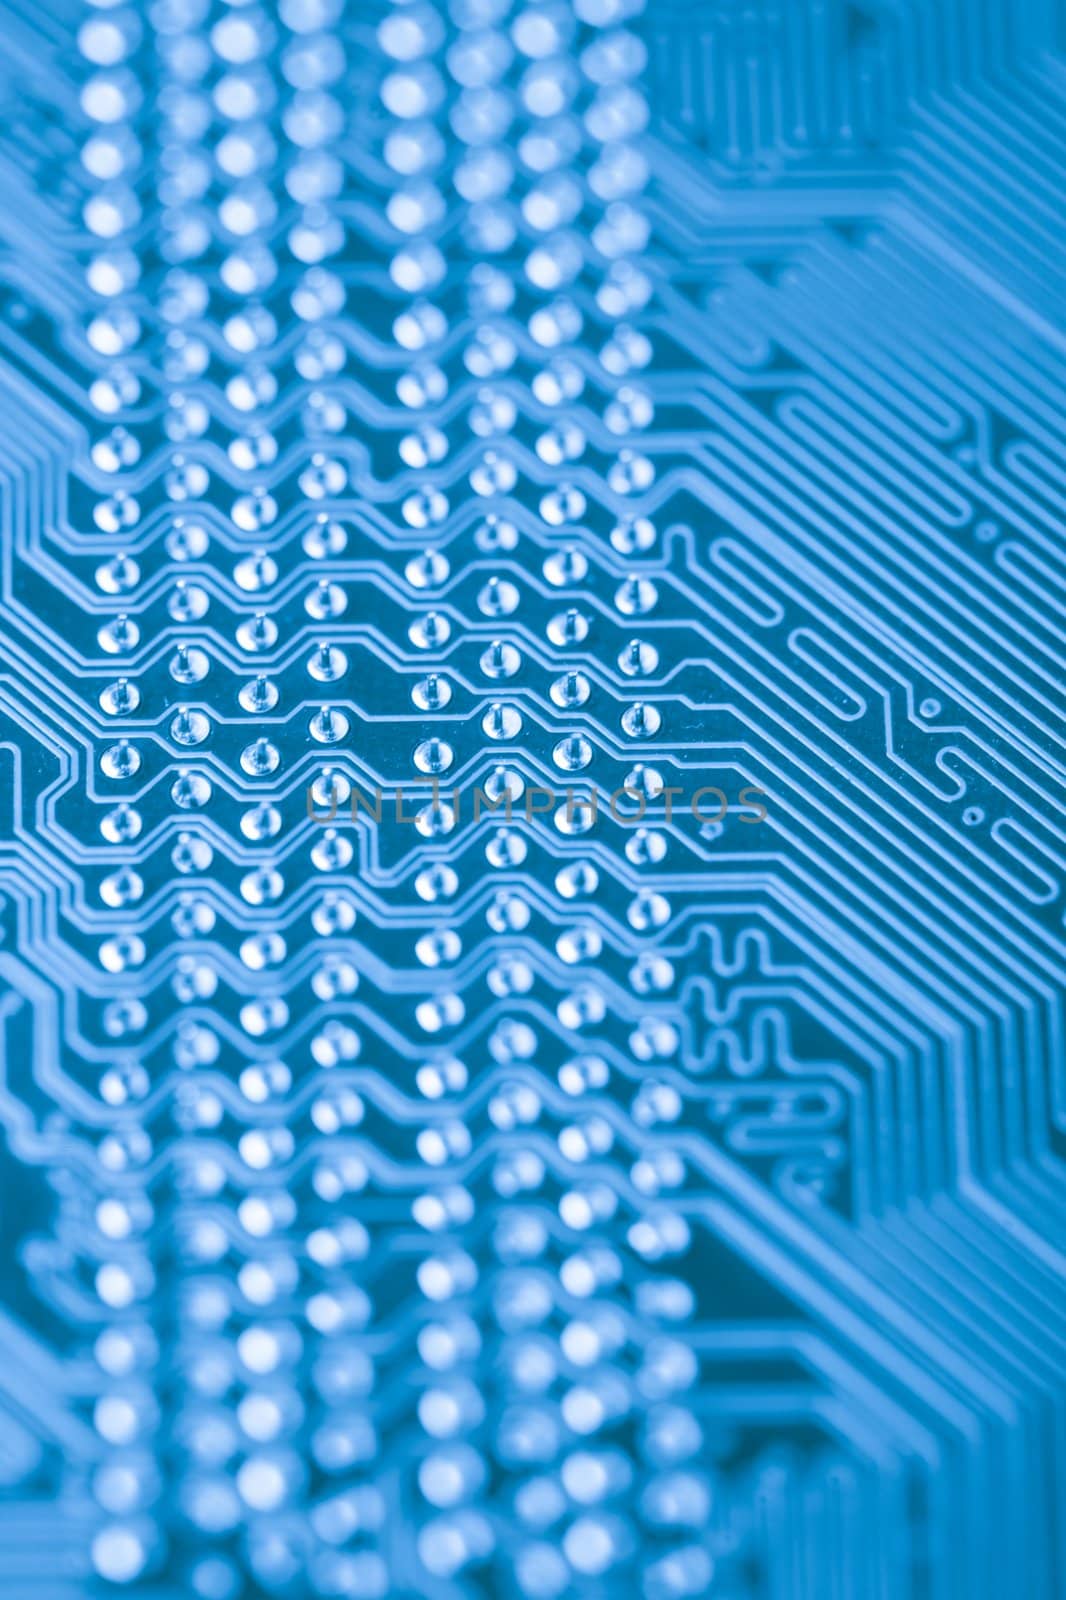 Microchip close up background for technology design